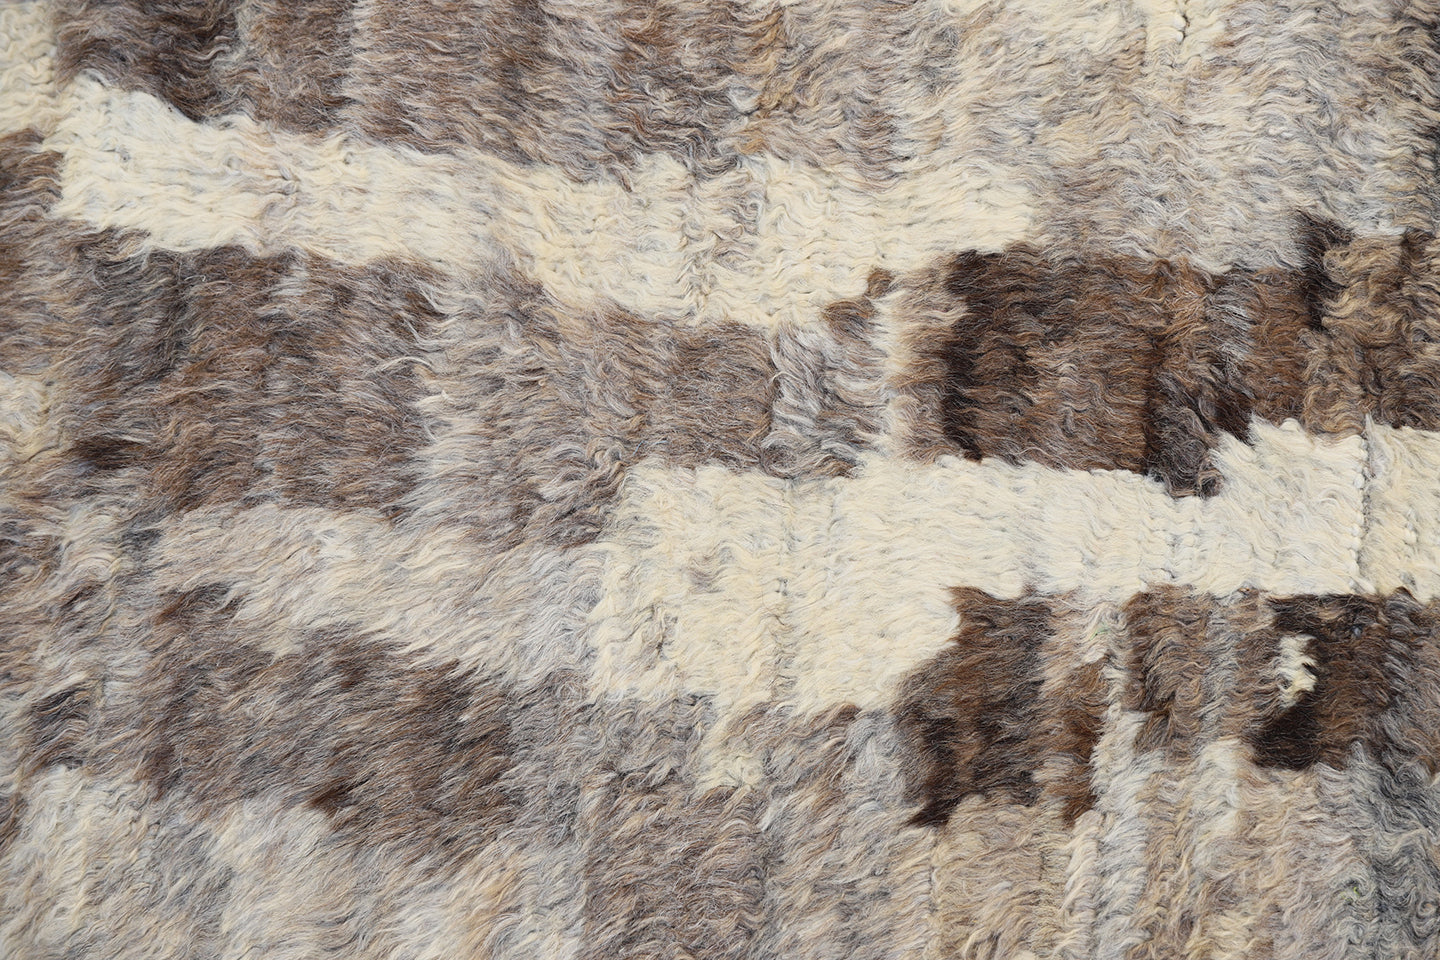 7'x10' Grey Brown White Abstract Animal Pattern Moroccan Style Shaggy Ariana Barchi Rug